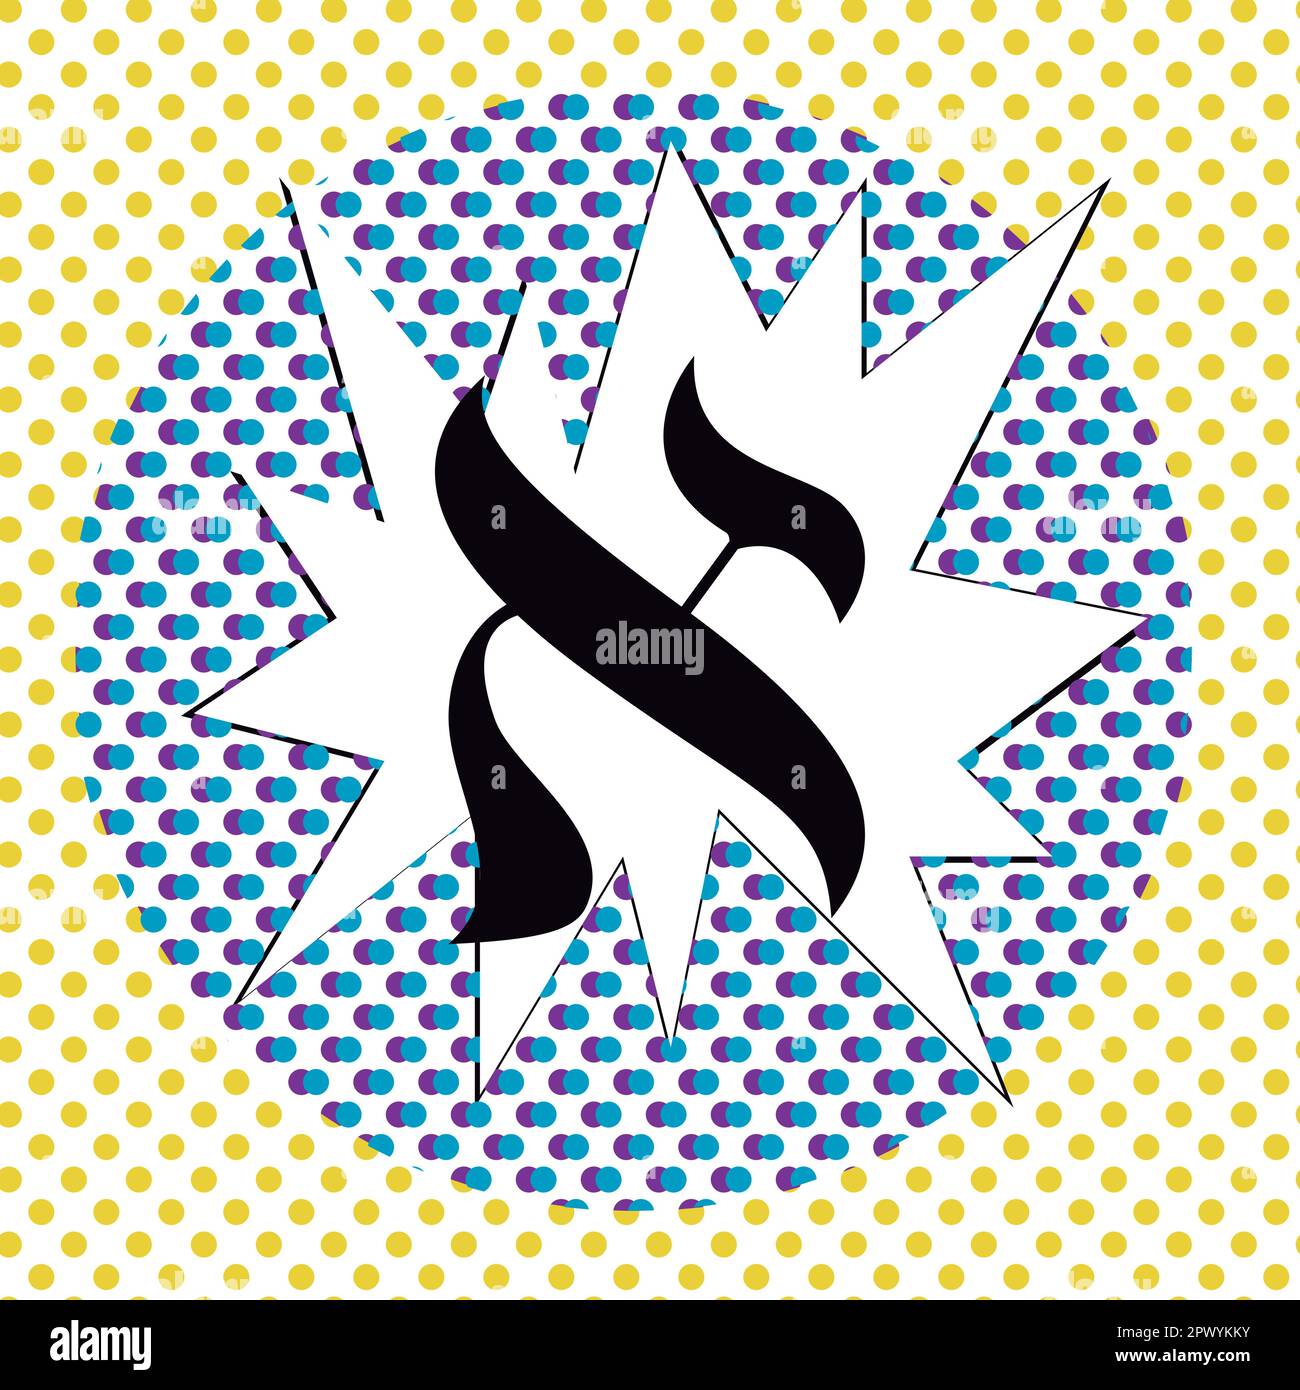 Vector illustration of the Hebrew alphabet in circular design. Hebrew letter called Aleph large isolated on black Stock Vector